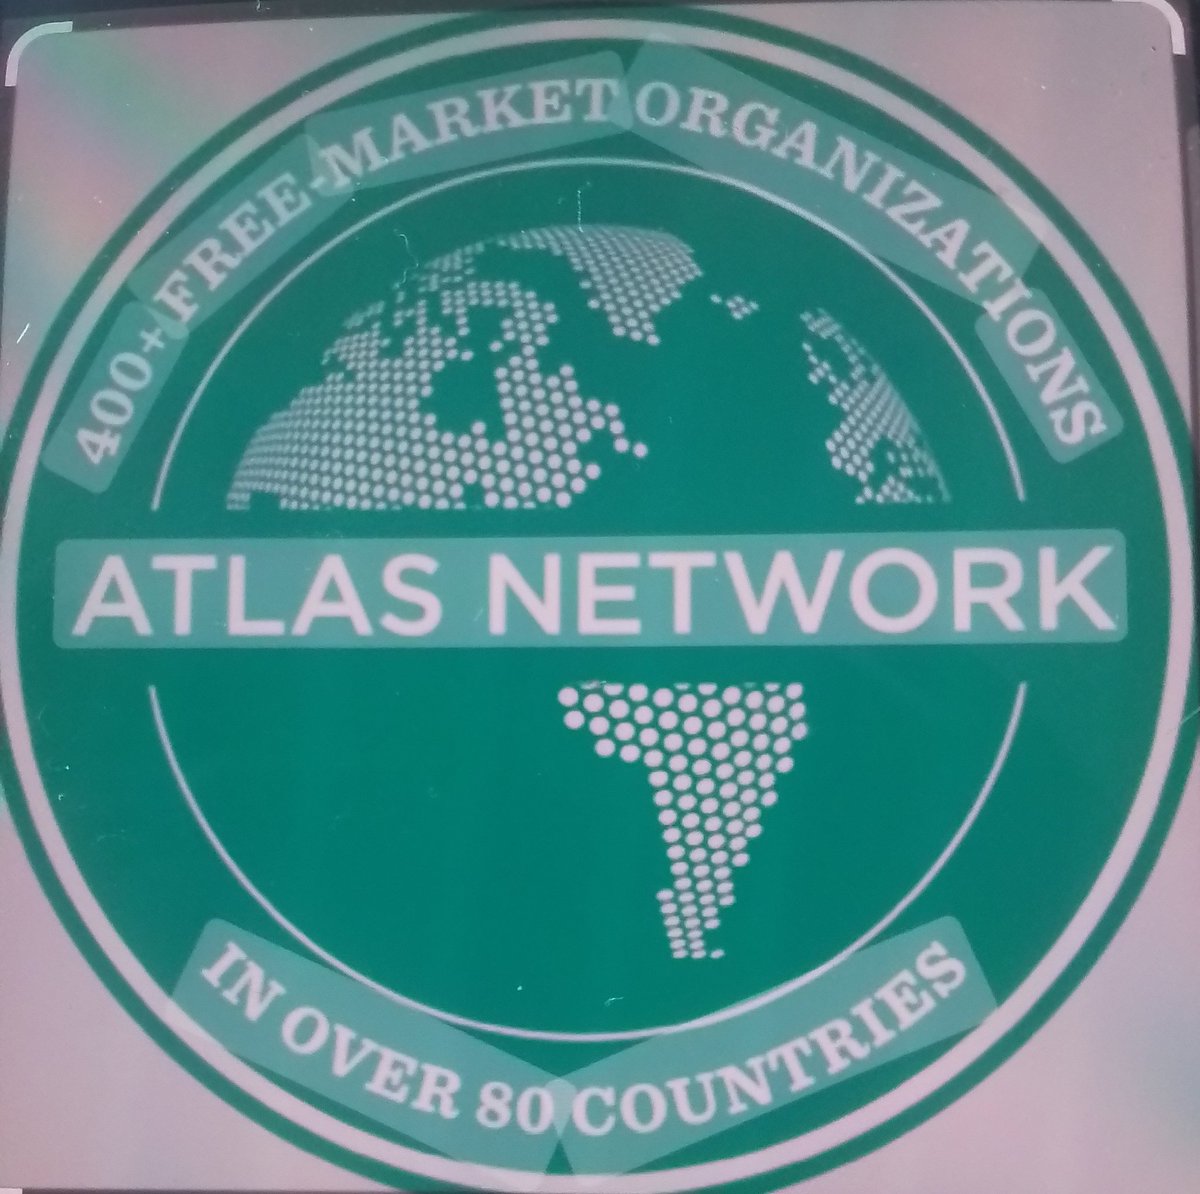 This is Atlas Network strategy. You accuse judges of activism & remove indigenous rights.Most well educated countries see throught it & were not convinced by Rogernomics or Thatcher's Hayek obsession. We were mugs here.If it wasn't for Te Tiriti we become another Honduras